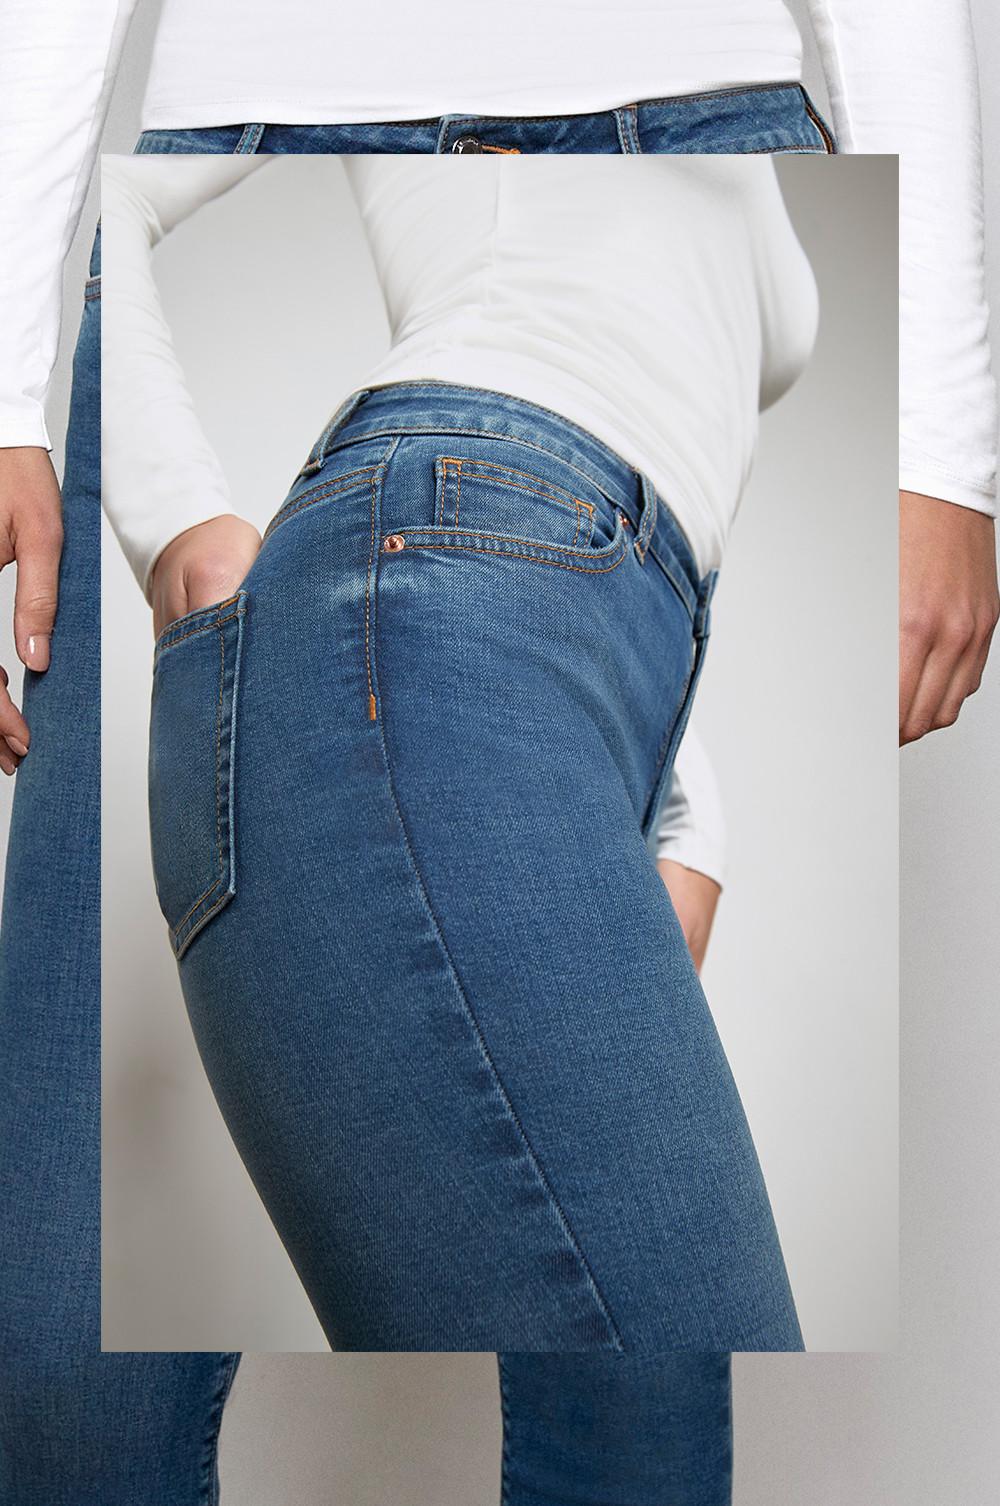 Size 10 woman can't fit into Primark size 14 jeans